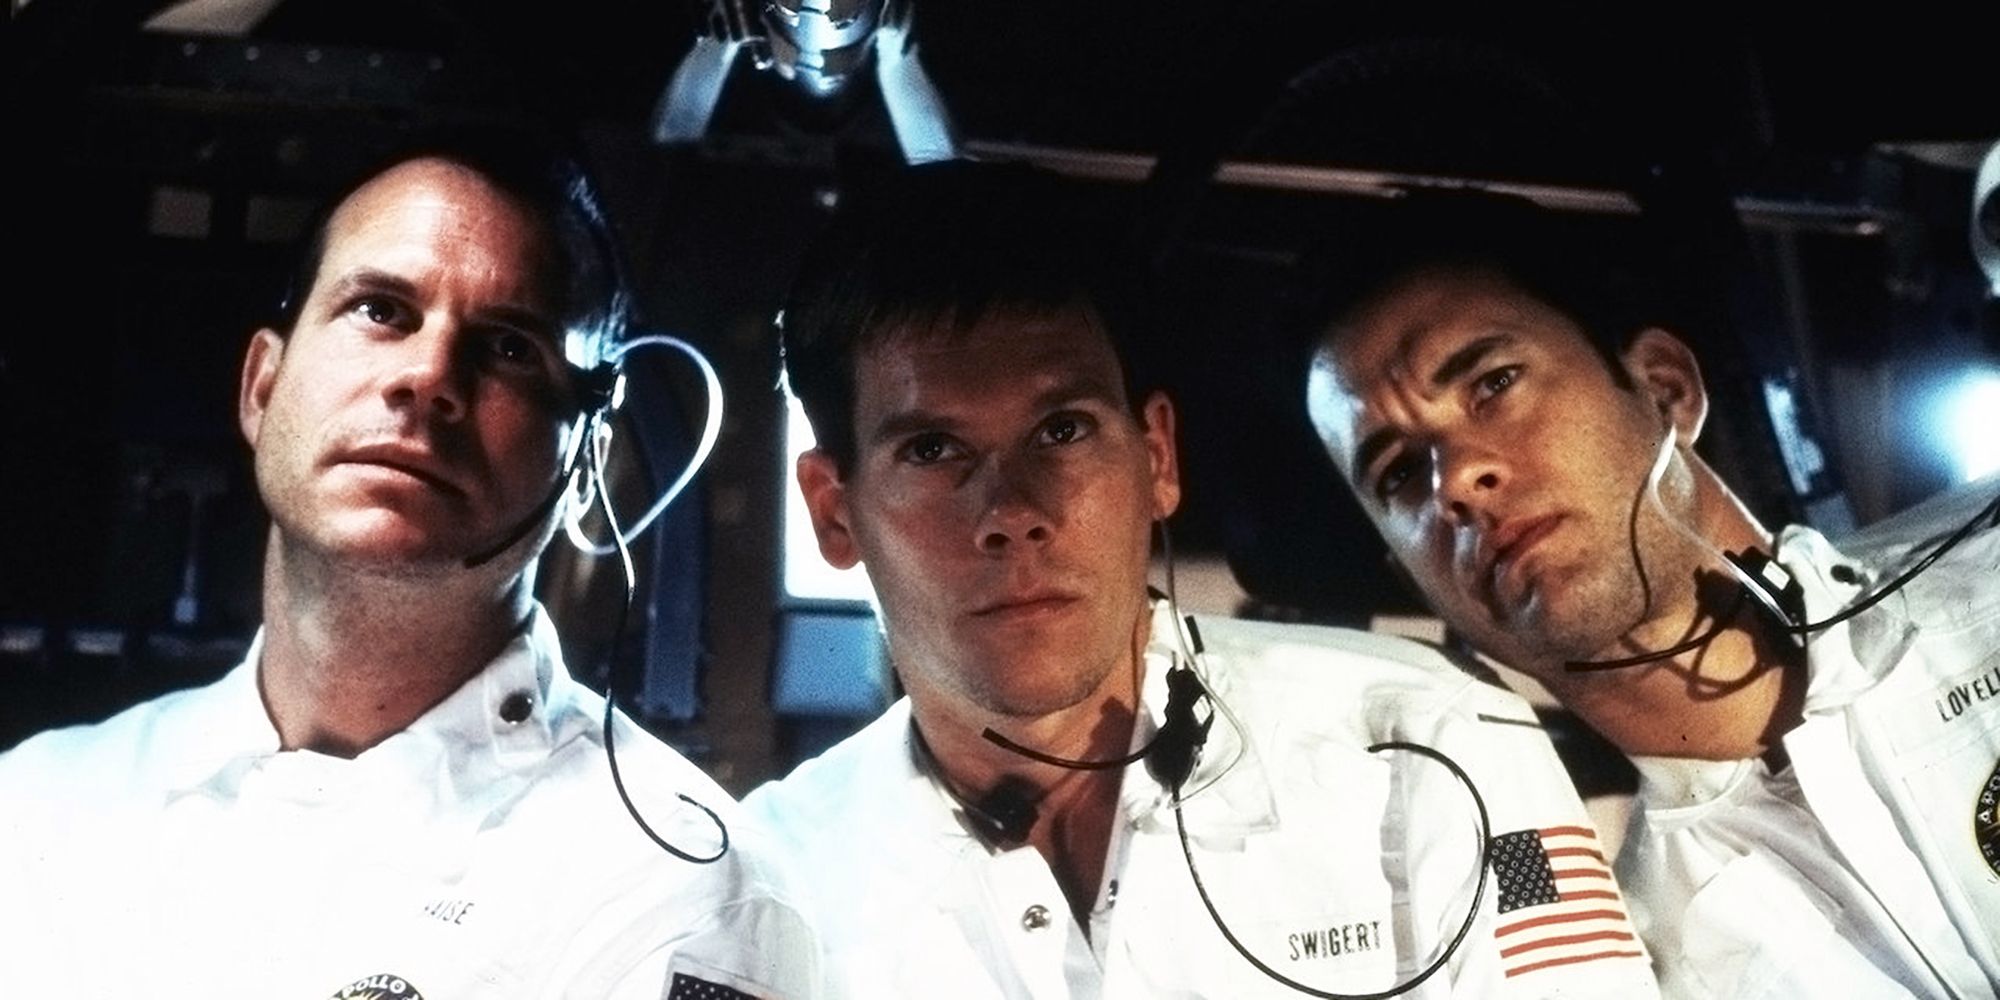 Bill Paxton, Kevin Bacon, and Tom Hanks aboard a spacecraft in Apollo 13